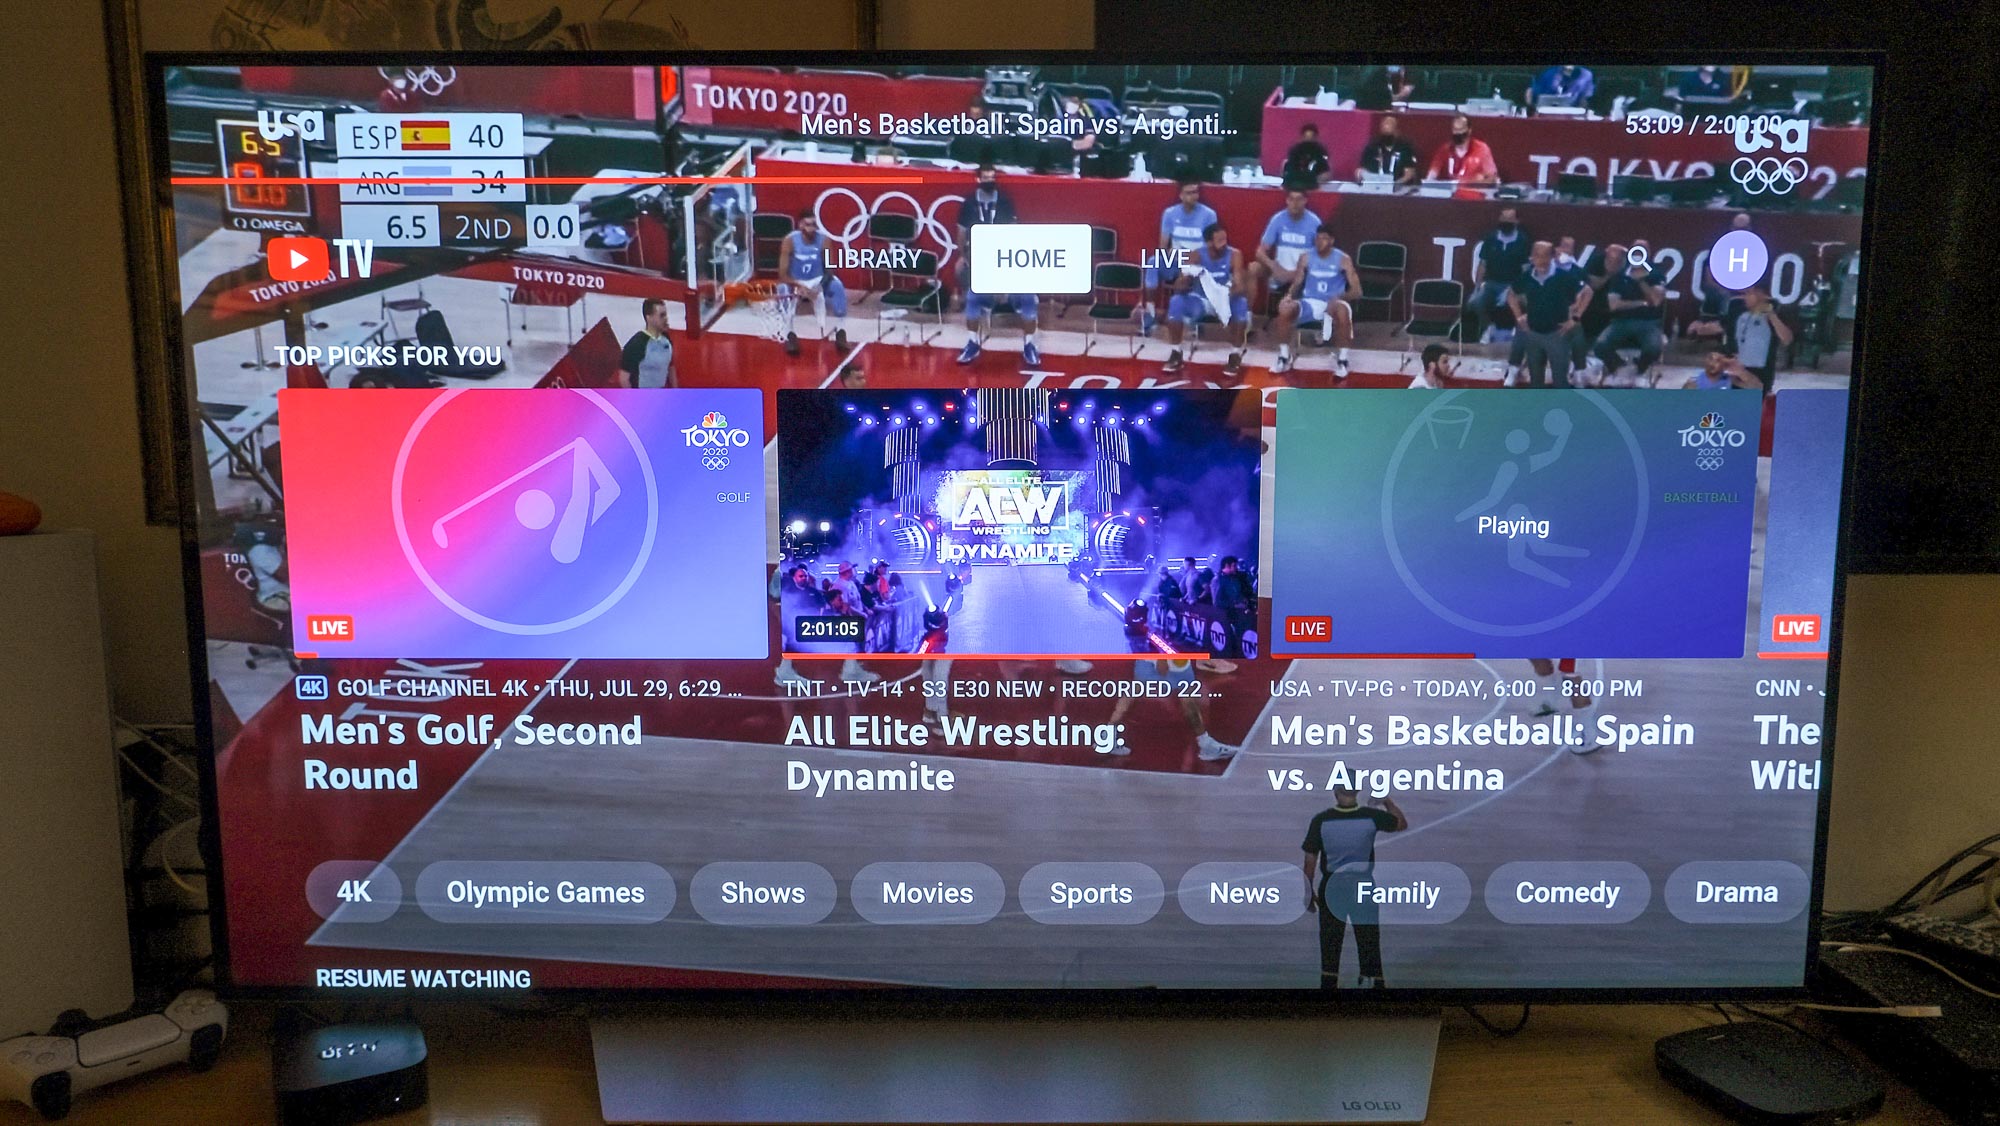 YouTube TV interface over Olympic basketball